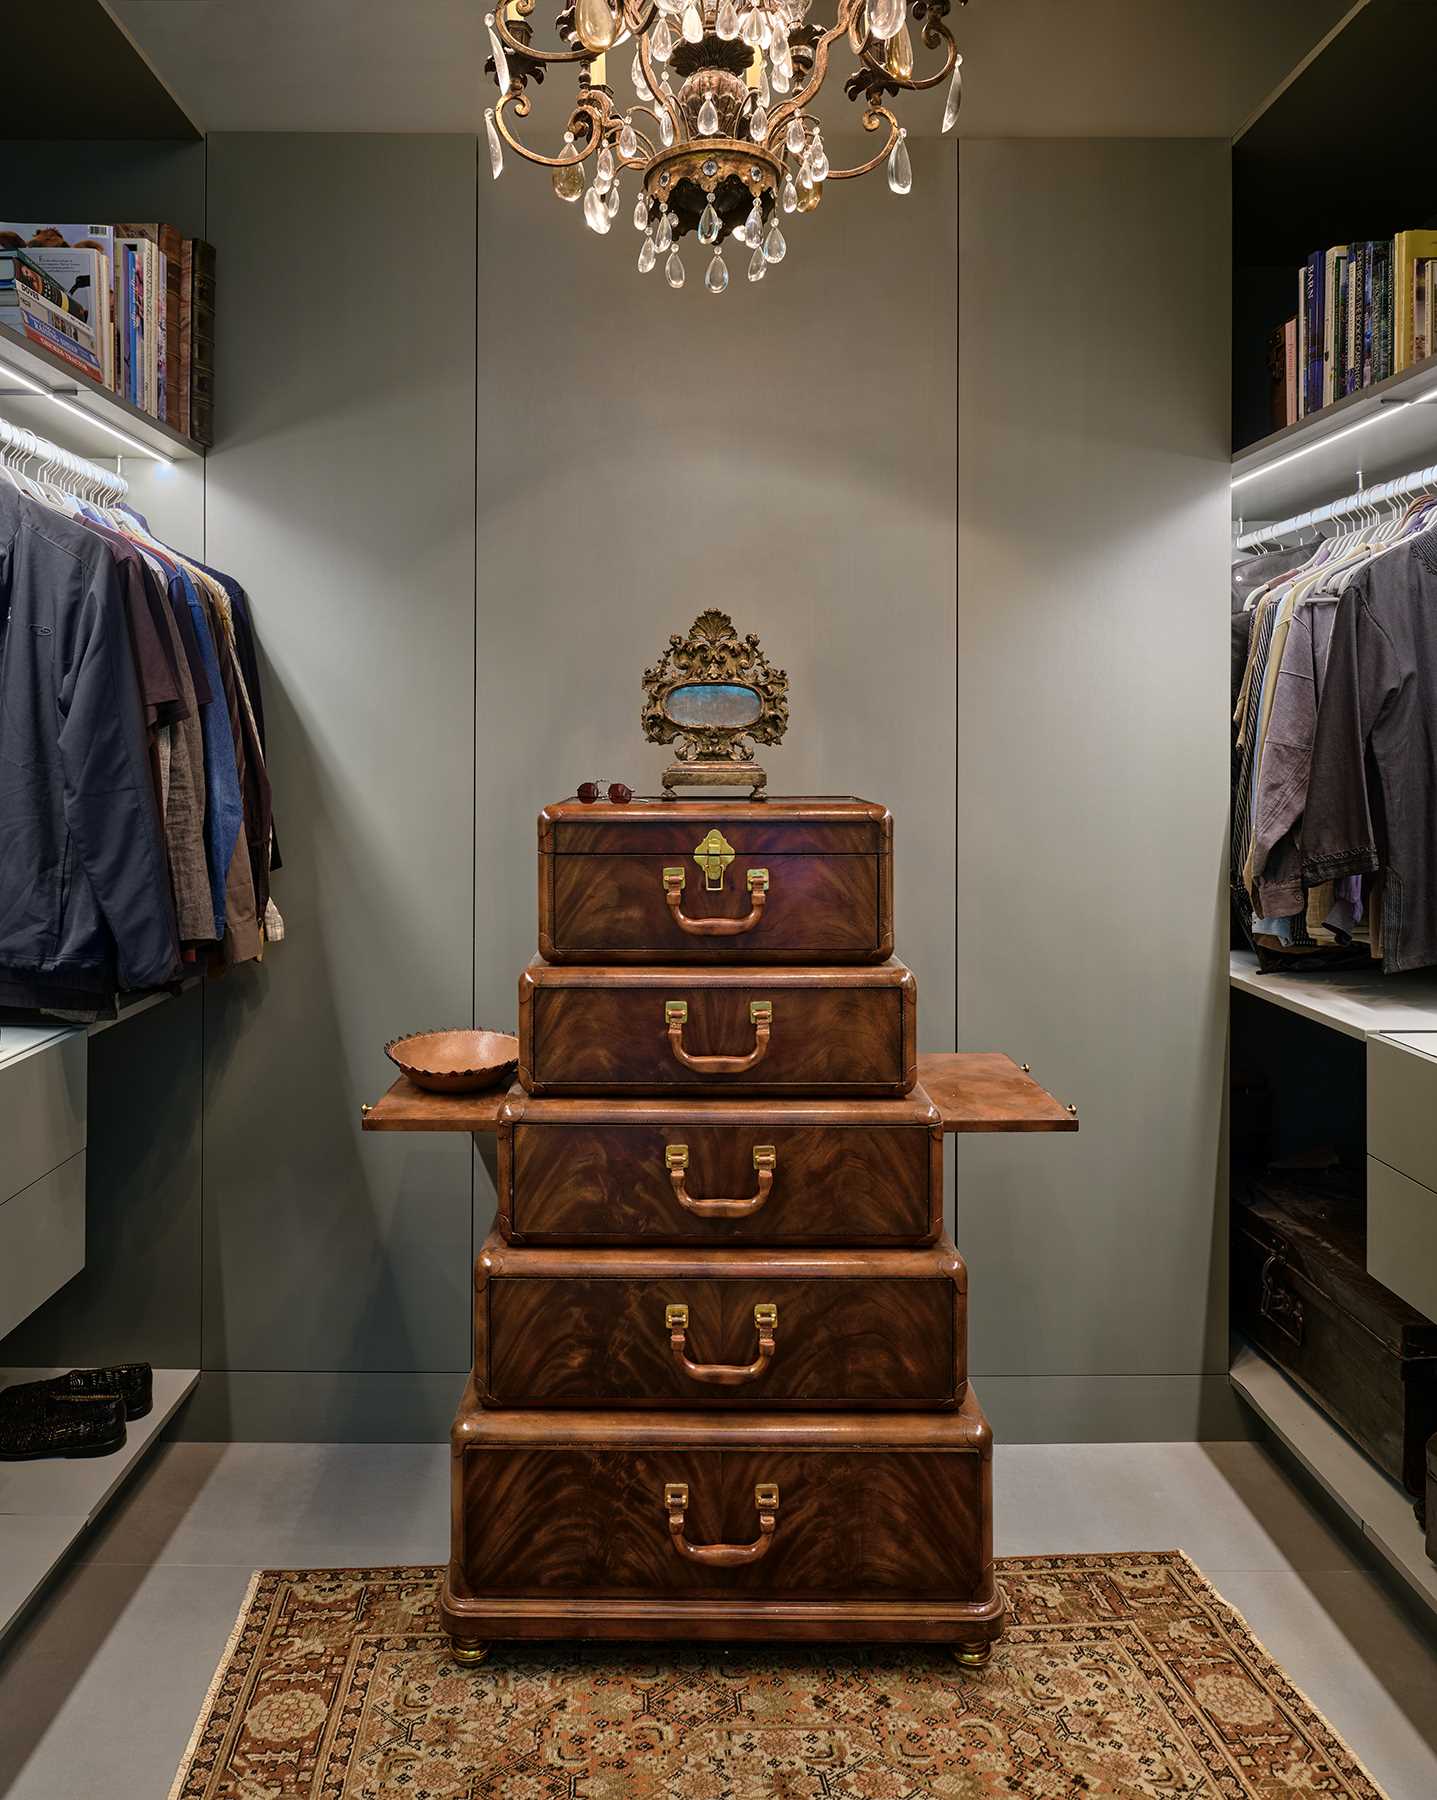 A walk-in closet with shelves that include under-mount lighting in addition to the chandelier.